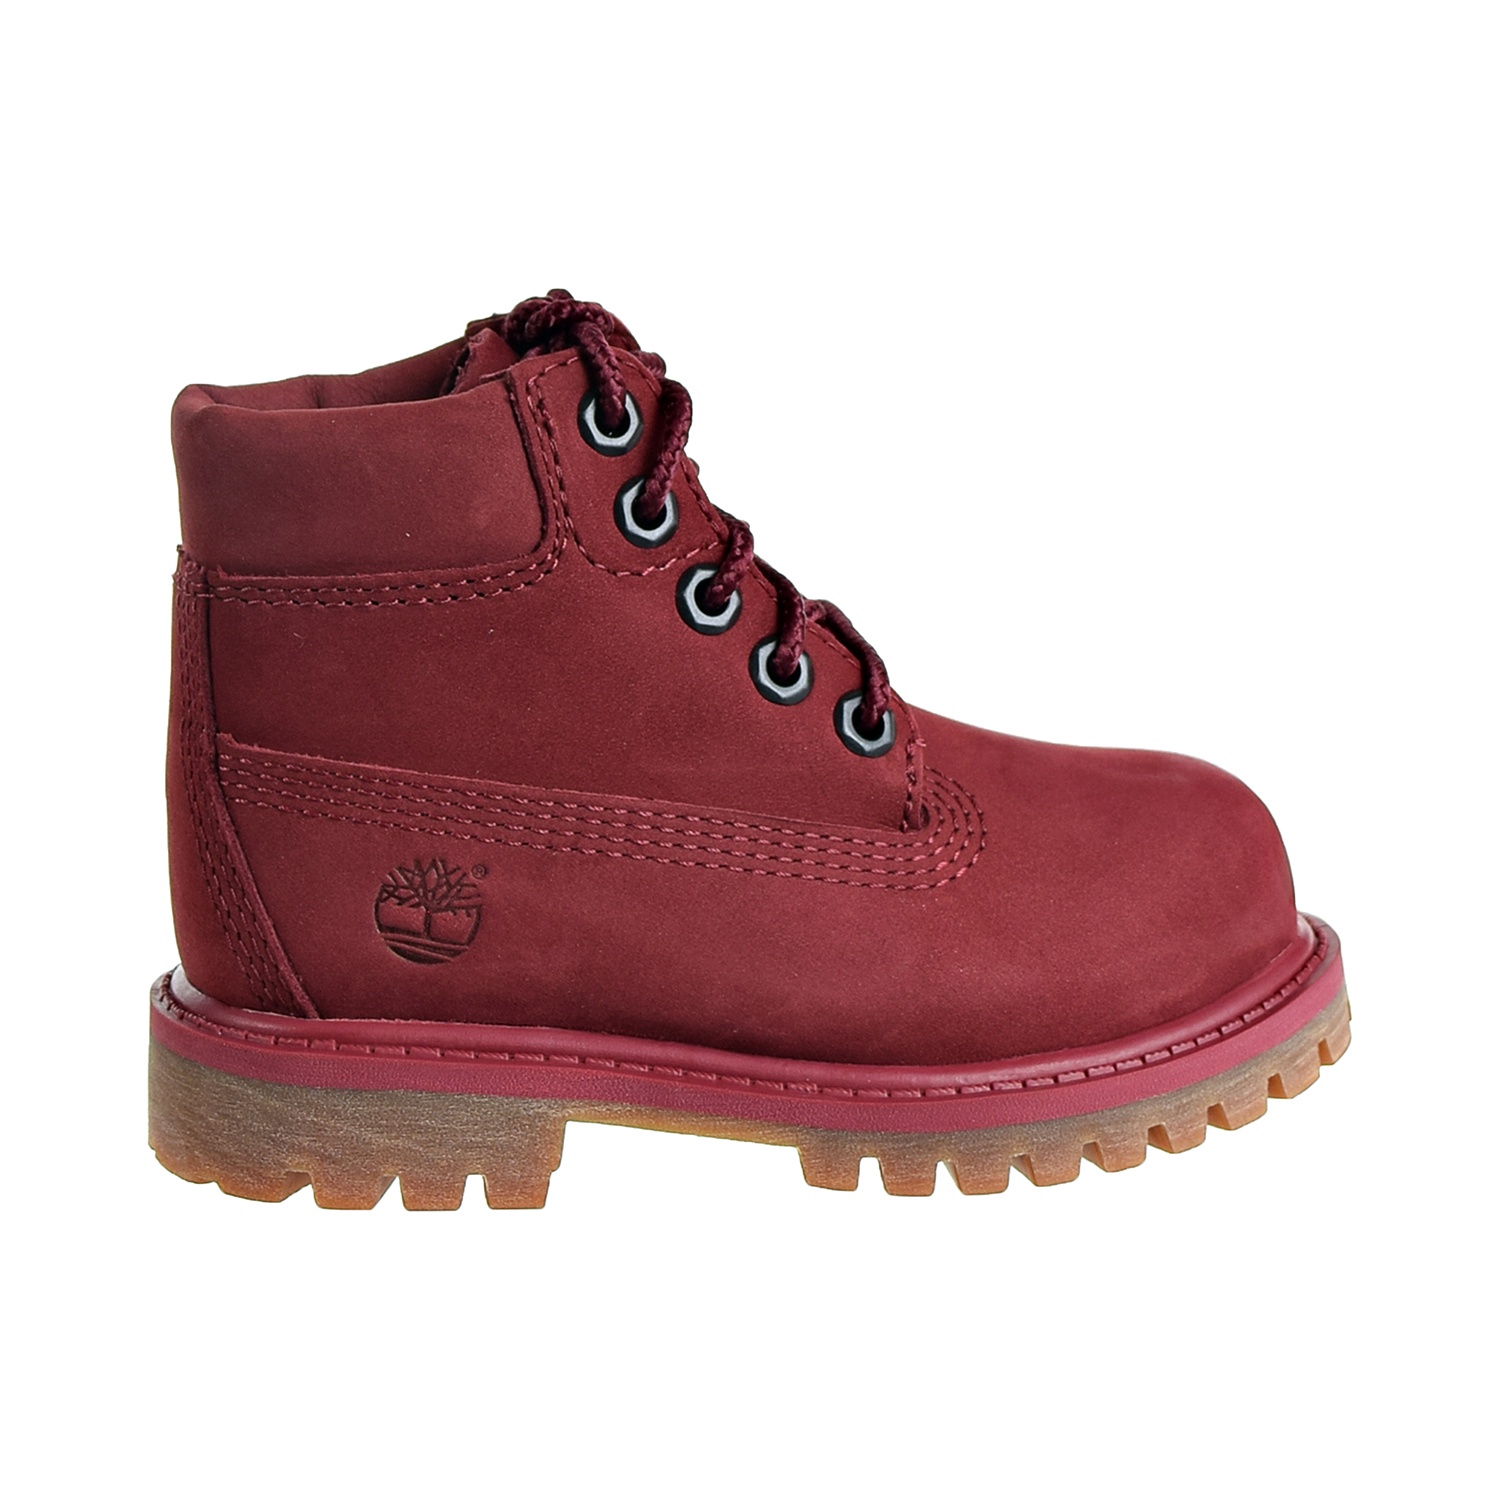 burgundy boots for toddlers